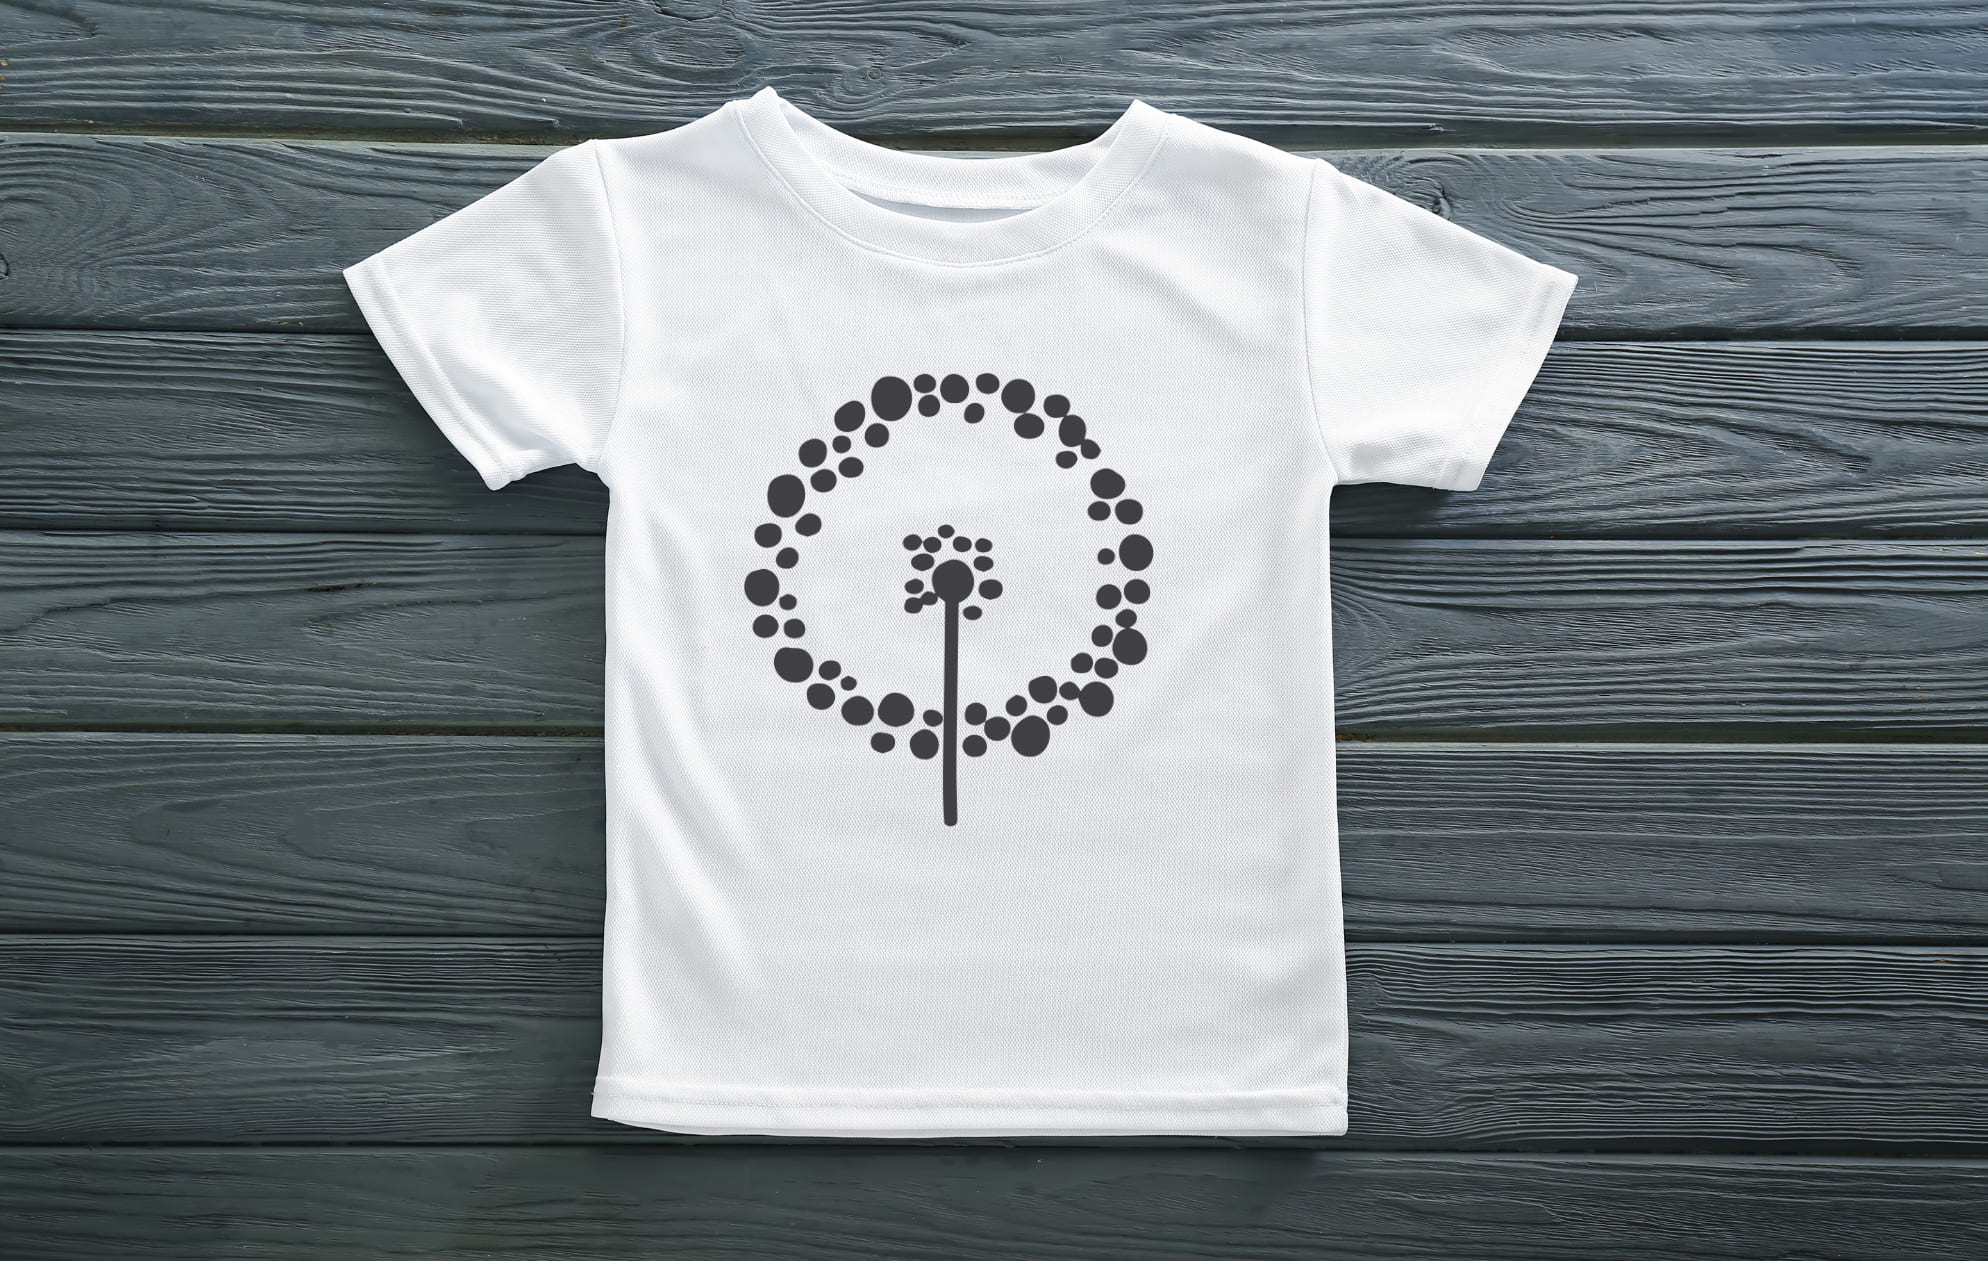 White t-shirt with a black silhouette of a dandelion.